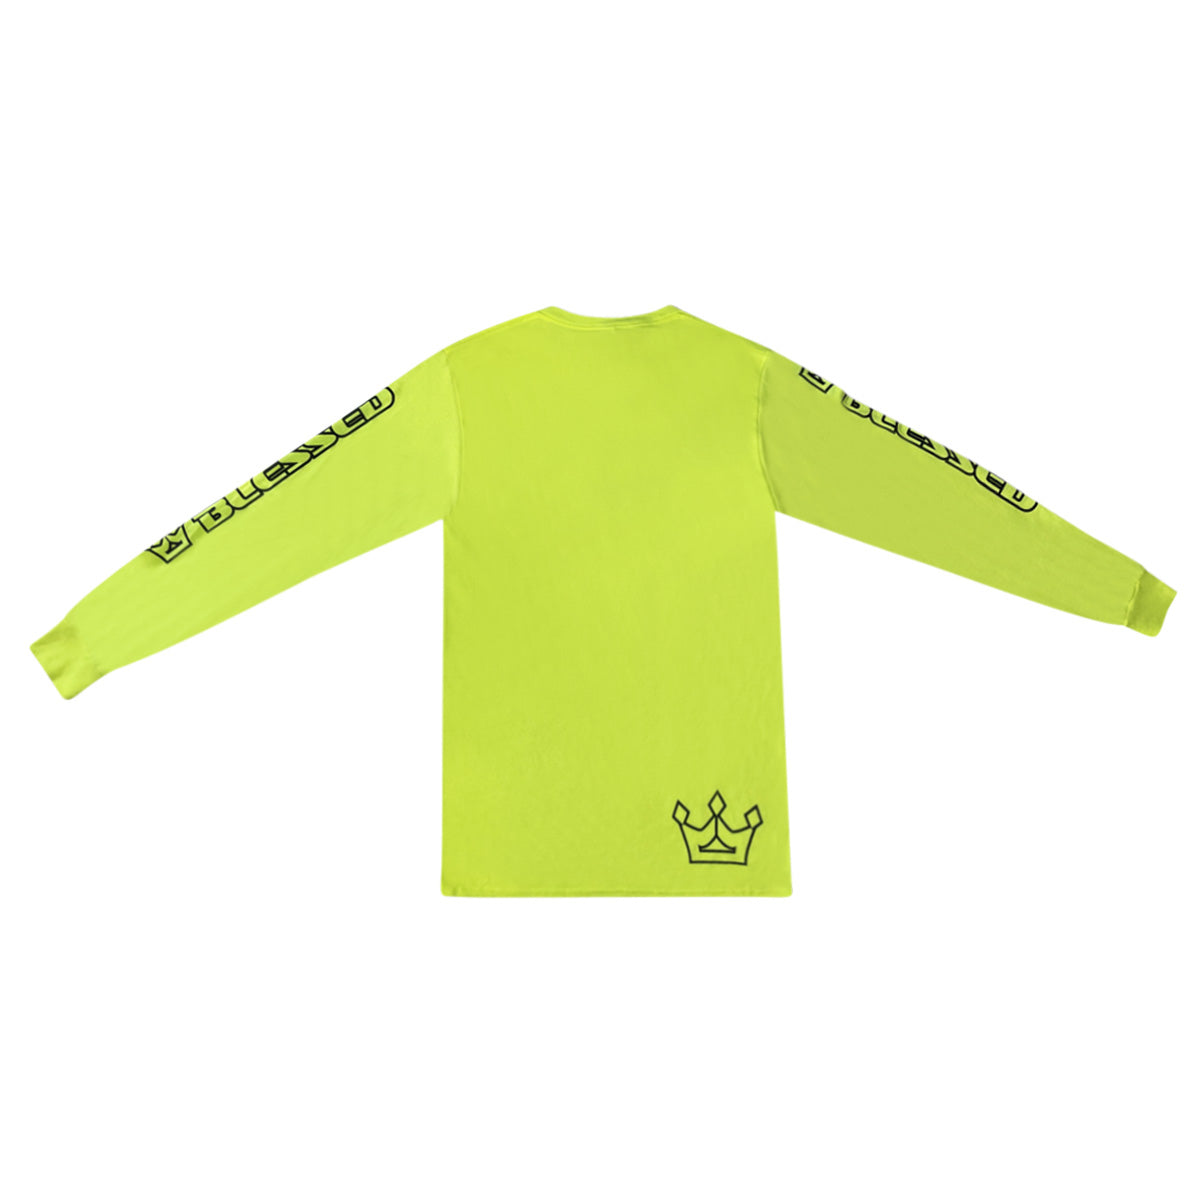 Safety Yellow Blessed Longsleeve Tee